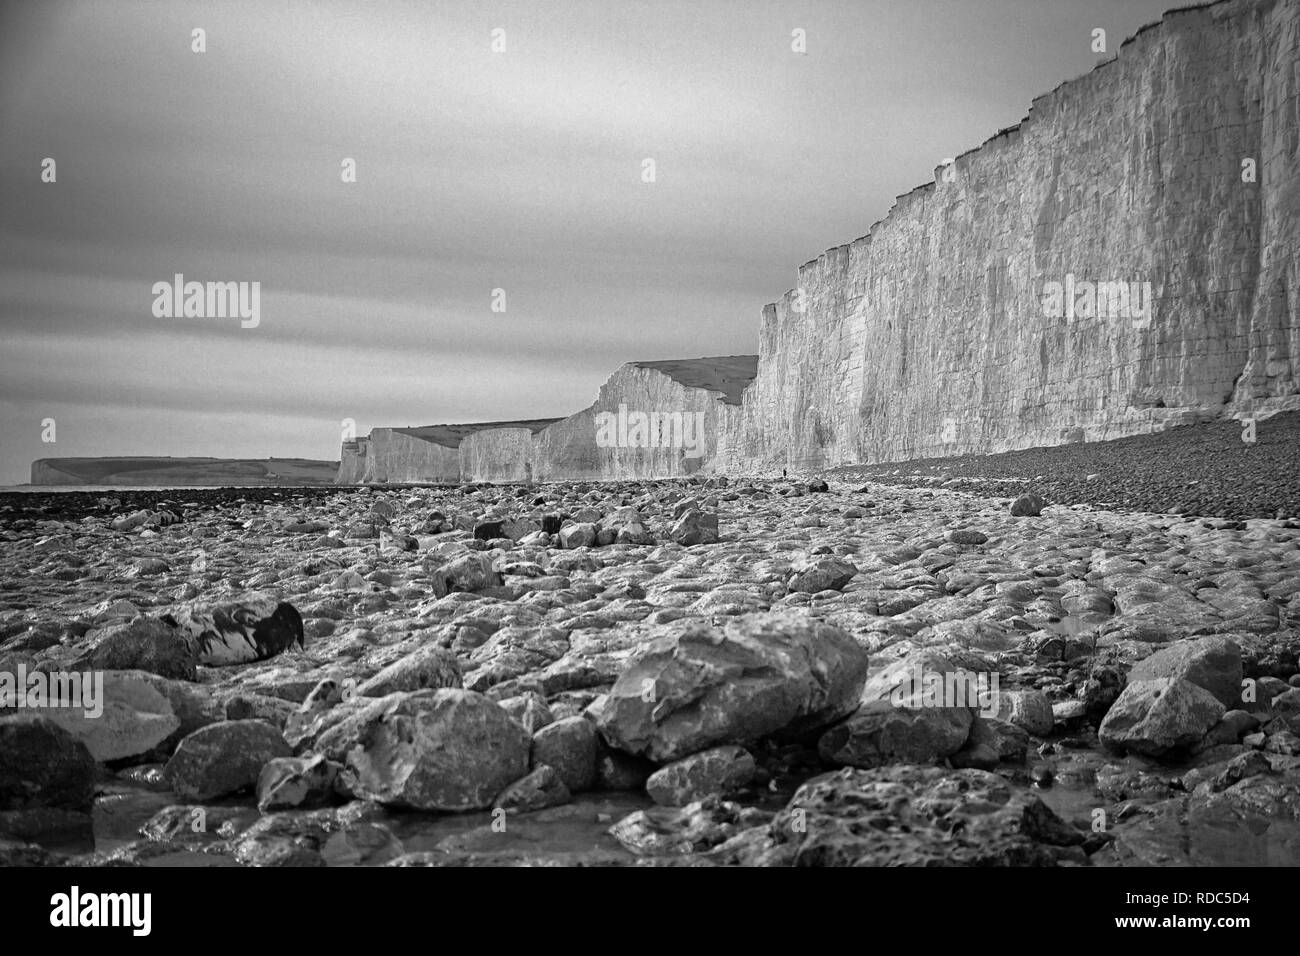 The Seven Sisters is a series of chalk cliffs by the English Channel. They form part of the South Downs in East Sussex. Stock Photo